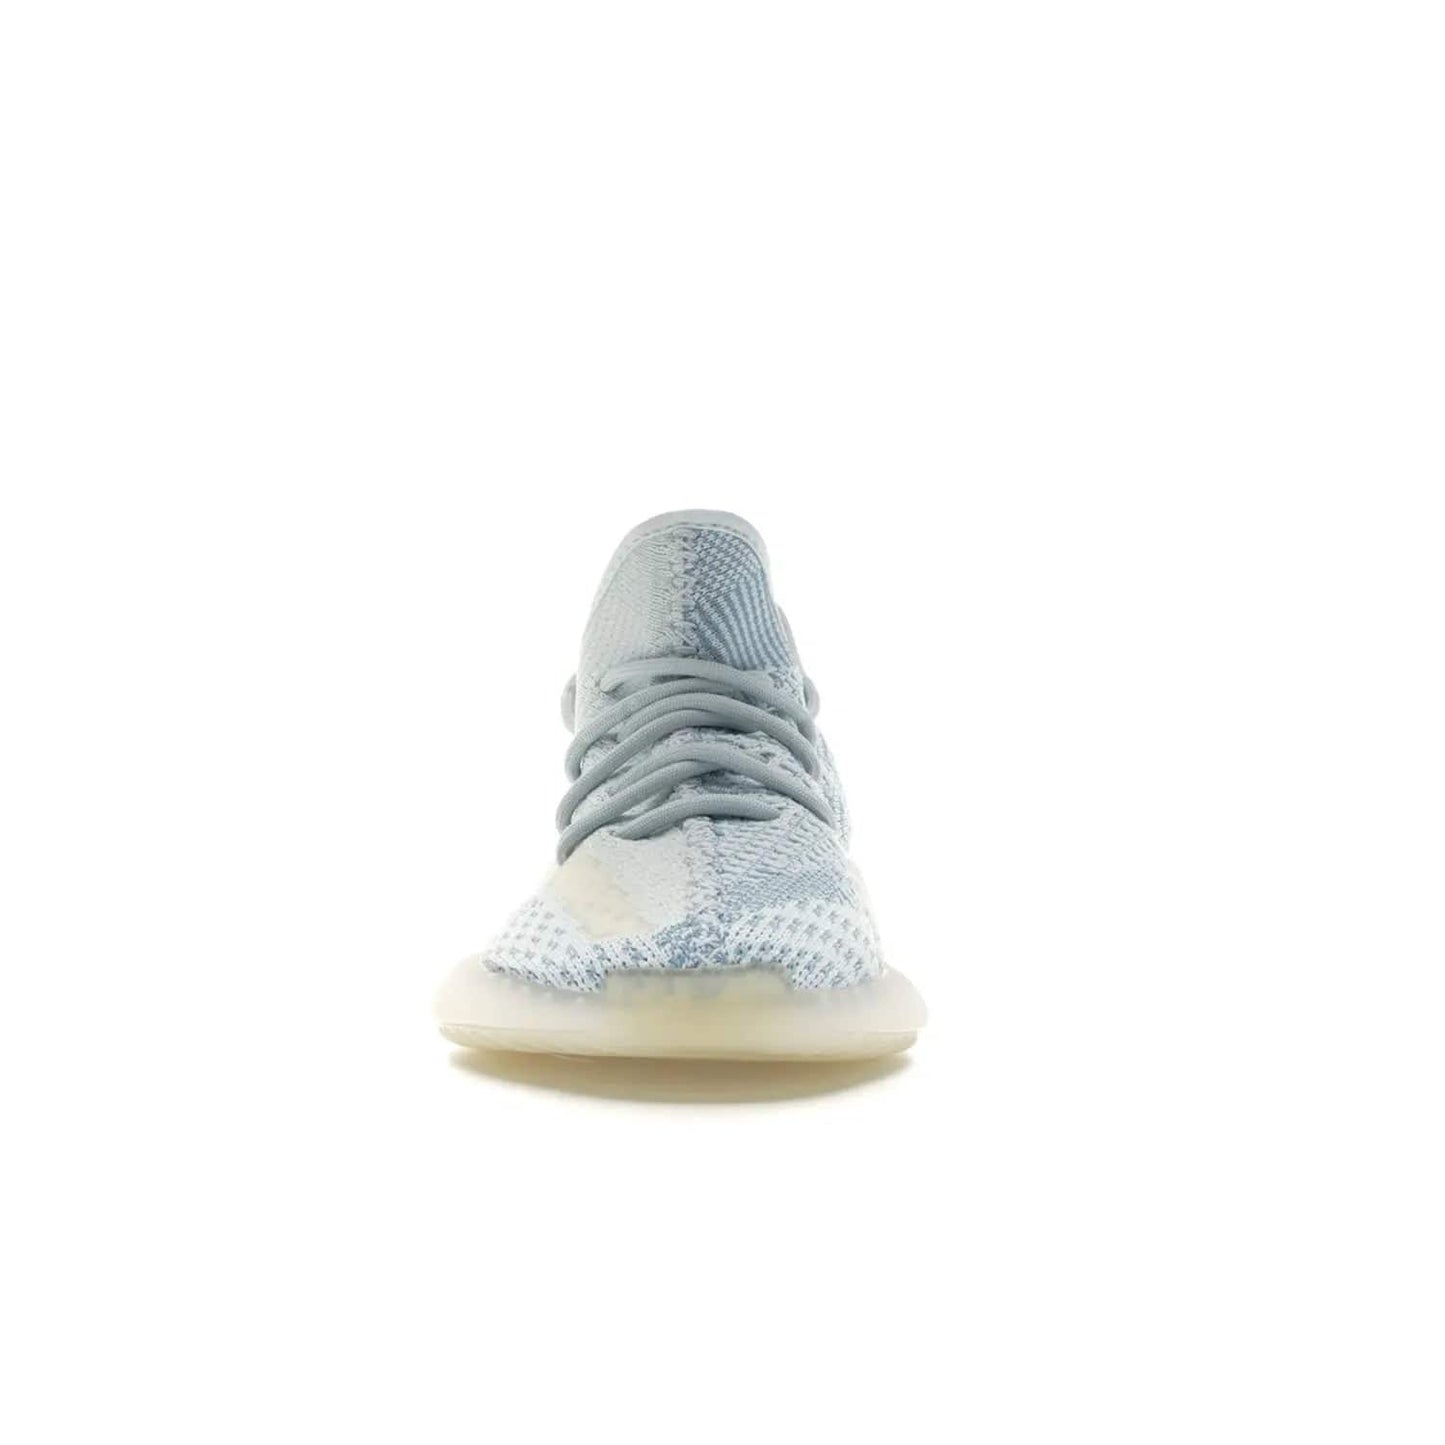 adidas Yeezy Boost 350 V2 Cloud White (Non-Reflective) - Image 10 - Only at www.BallersClubKickz.com - Adidas Yeezy Boost 350 V2 Cloud White (Non-Reflective) features Primeknit fabric and a unique, eye-catching design of cream, bluish-white, and transparent strip. Step out in timeless style with this eye-catching sneaker.